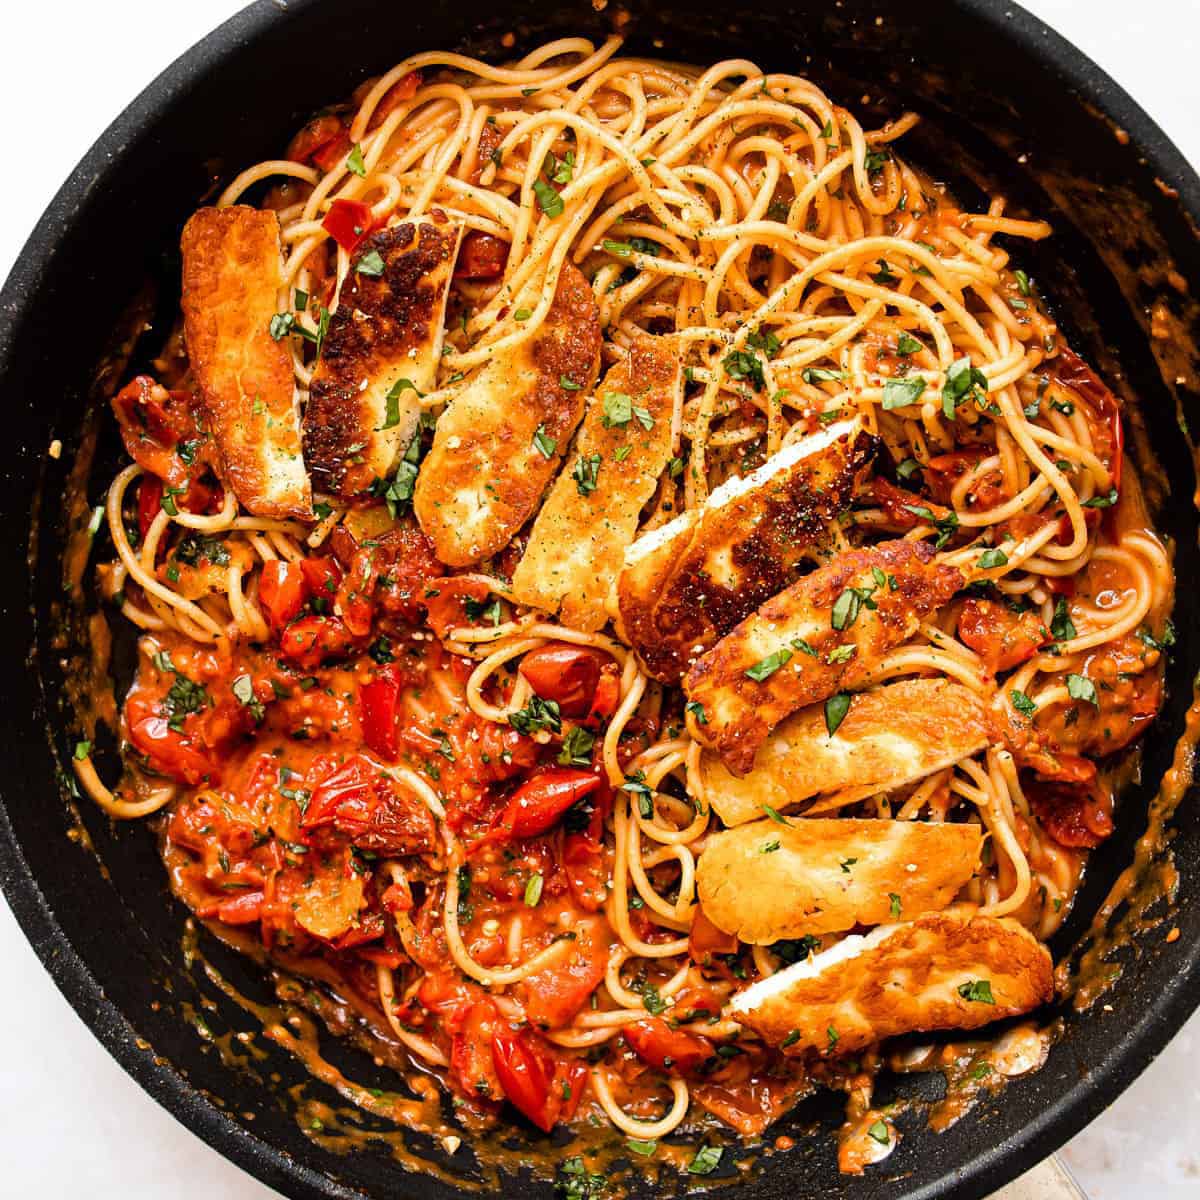 Halloumi pasta with tomatoes and spaghetti in a skillet.